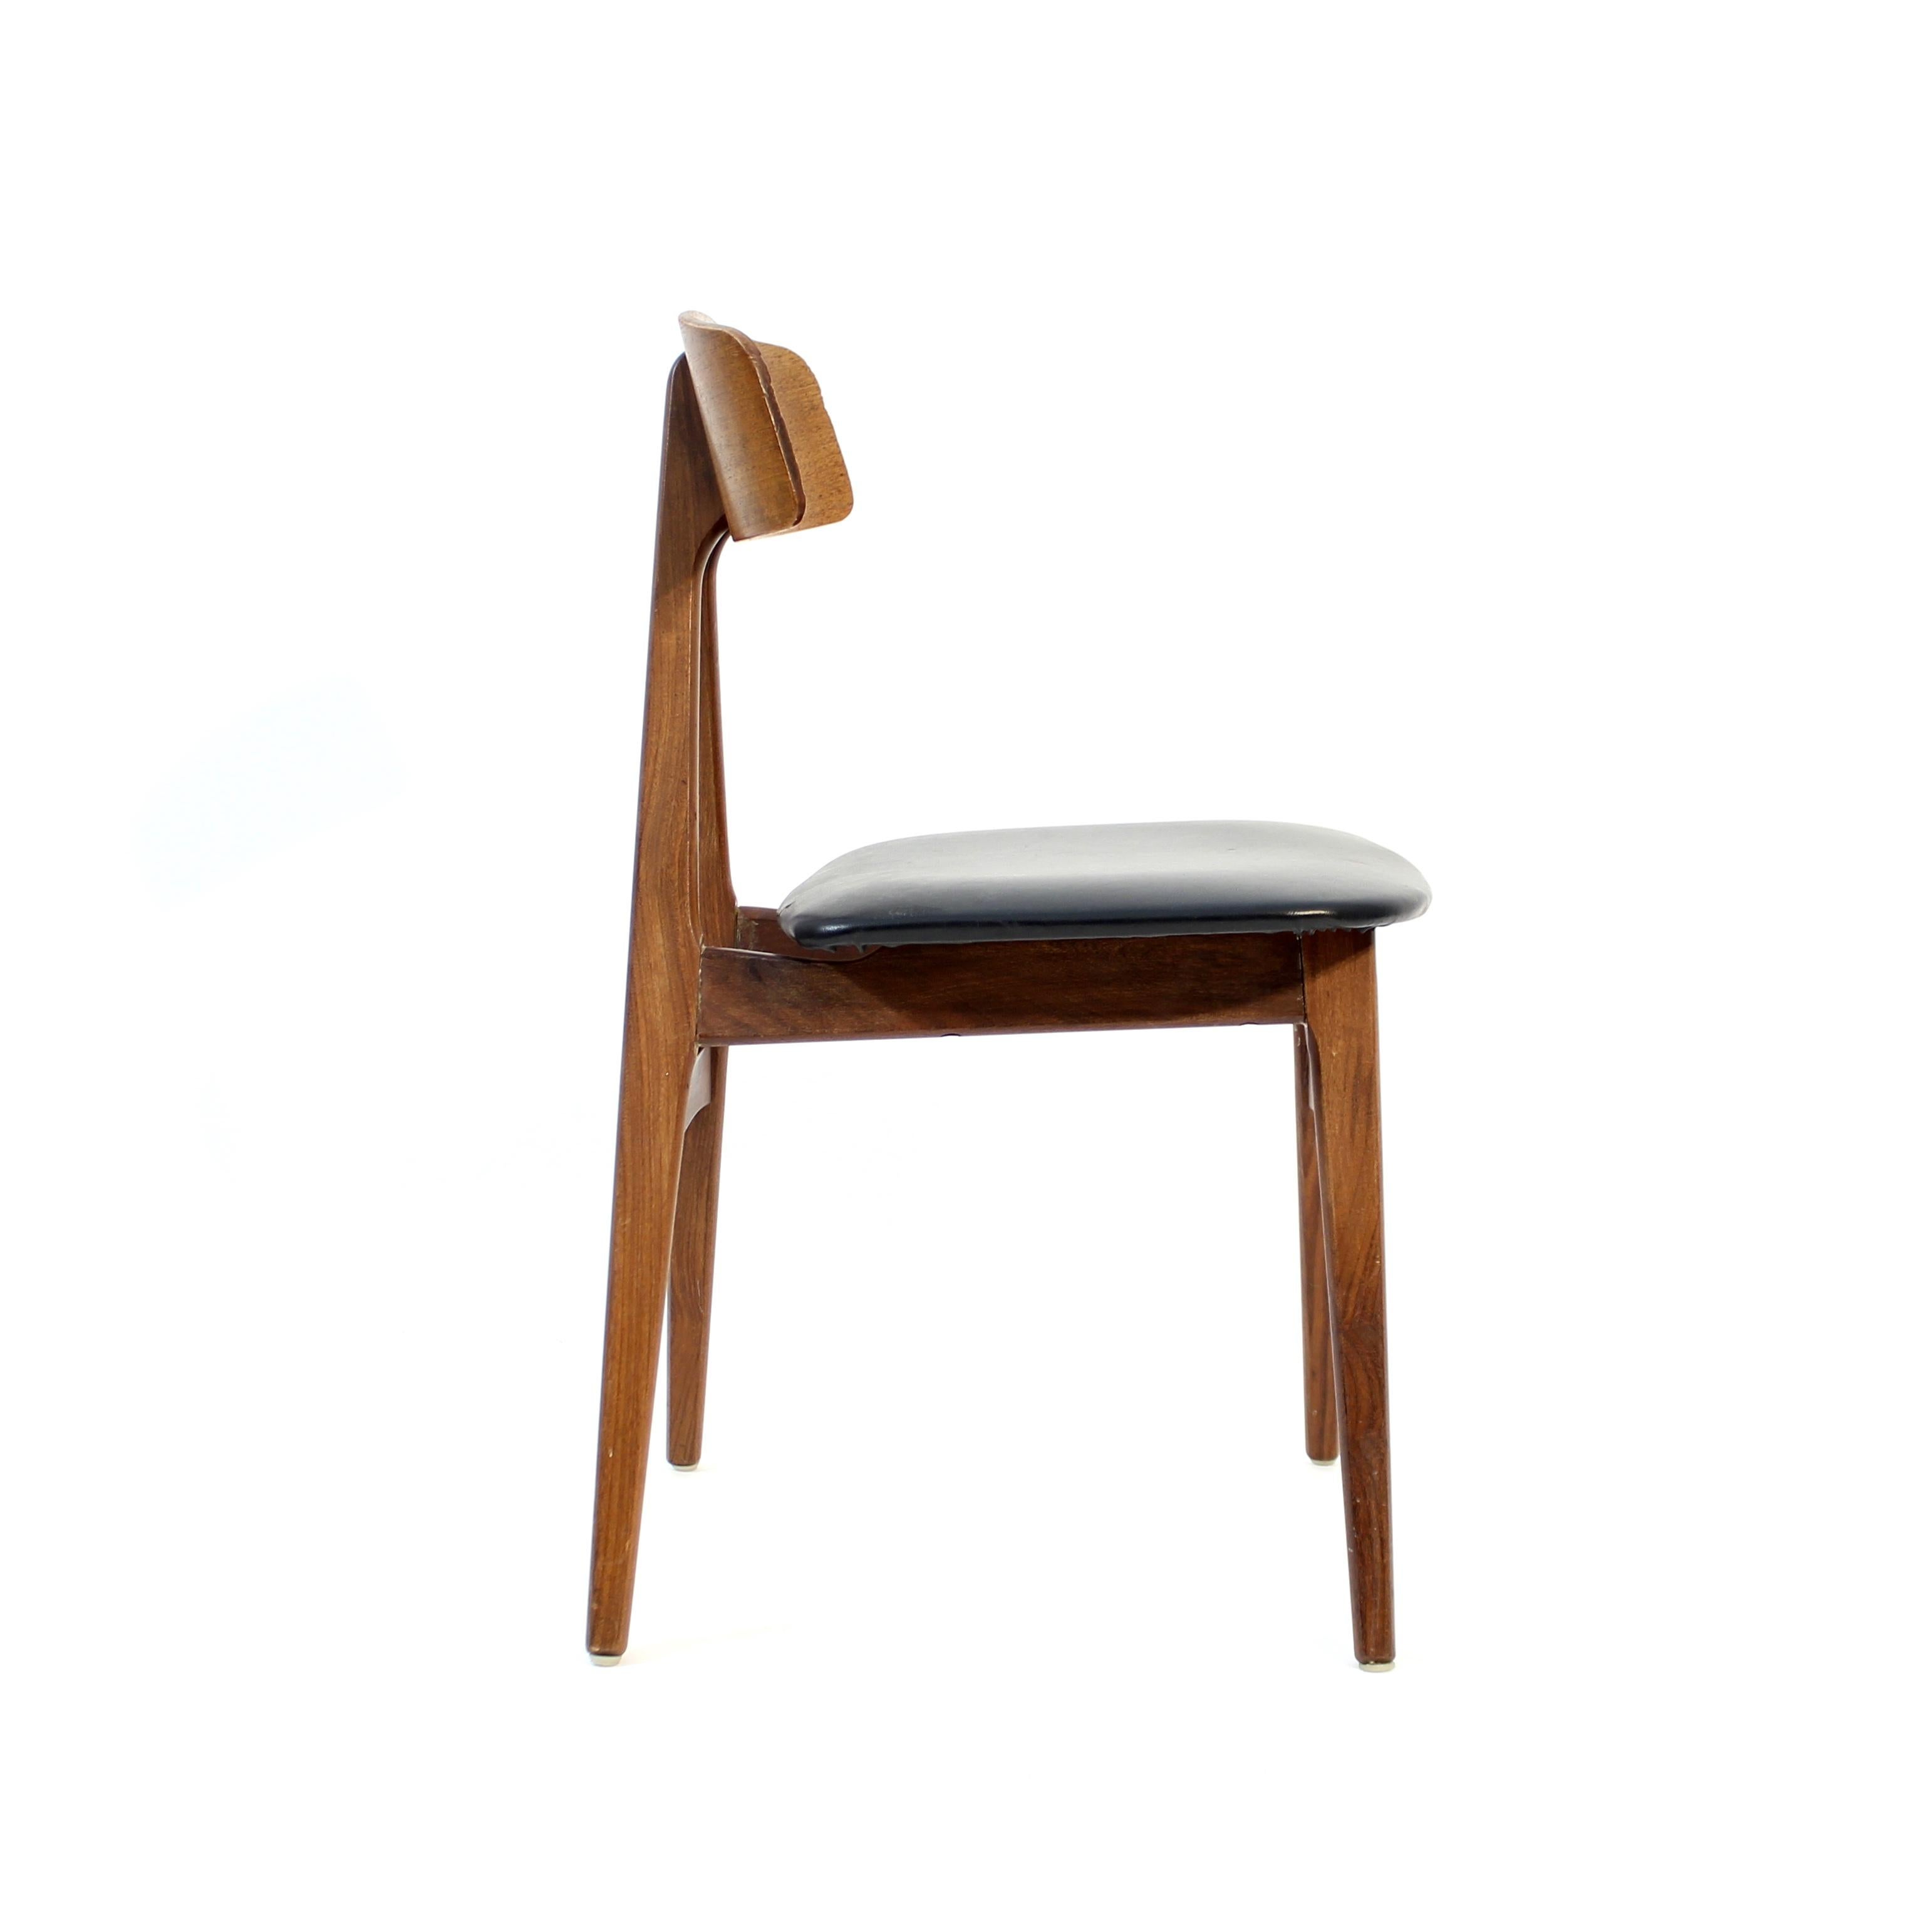 Bengt Ruda, Nizza teak chair for IKEA, 1959 In Good Condition For Sale In Uppsala, SE